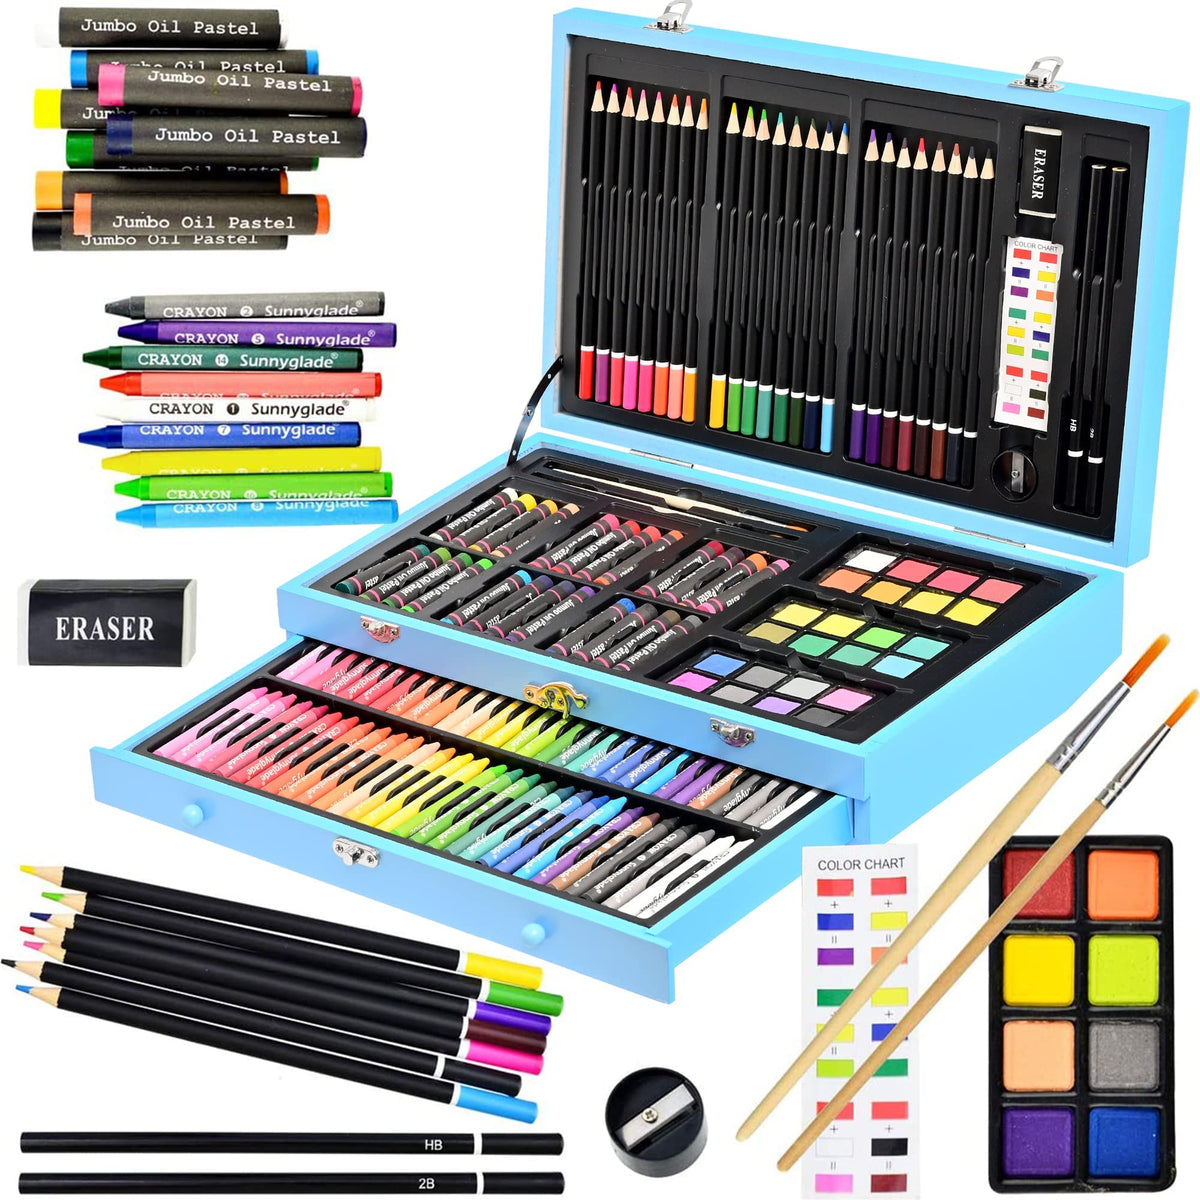 Art Supplies, 153-Pack Deluxe Wooden Art Set Crafts Drawing Painting  Coloring S